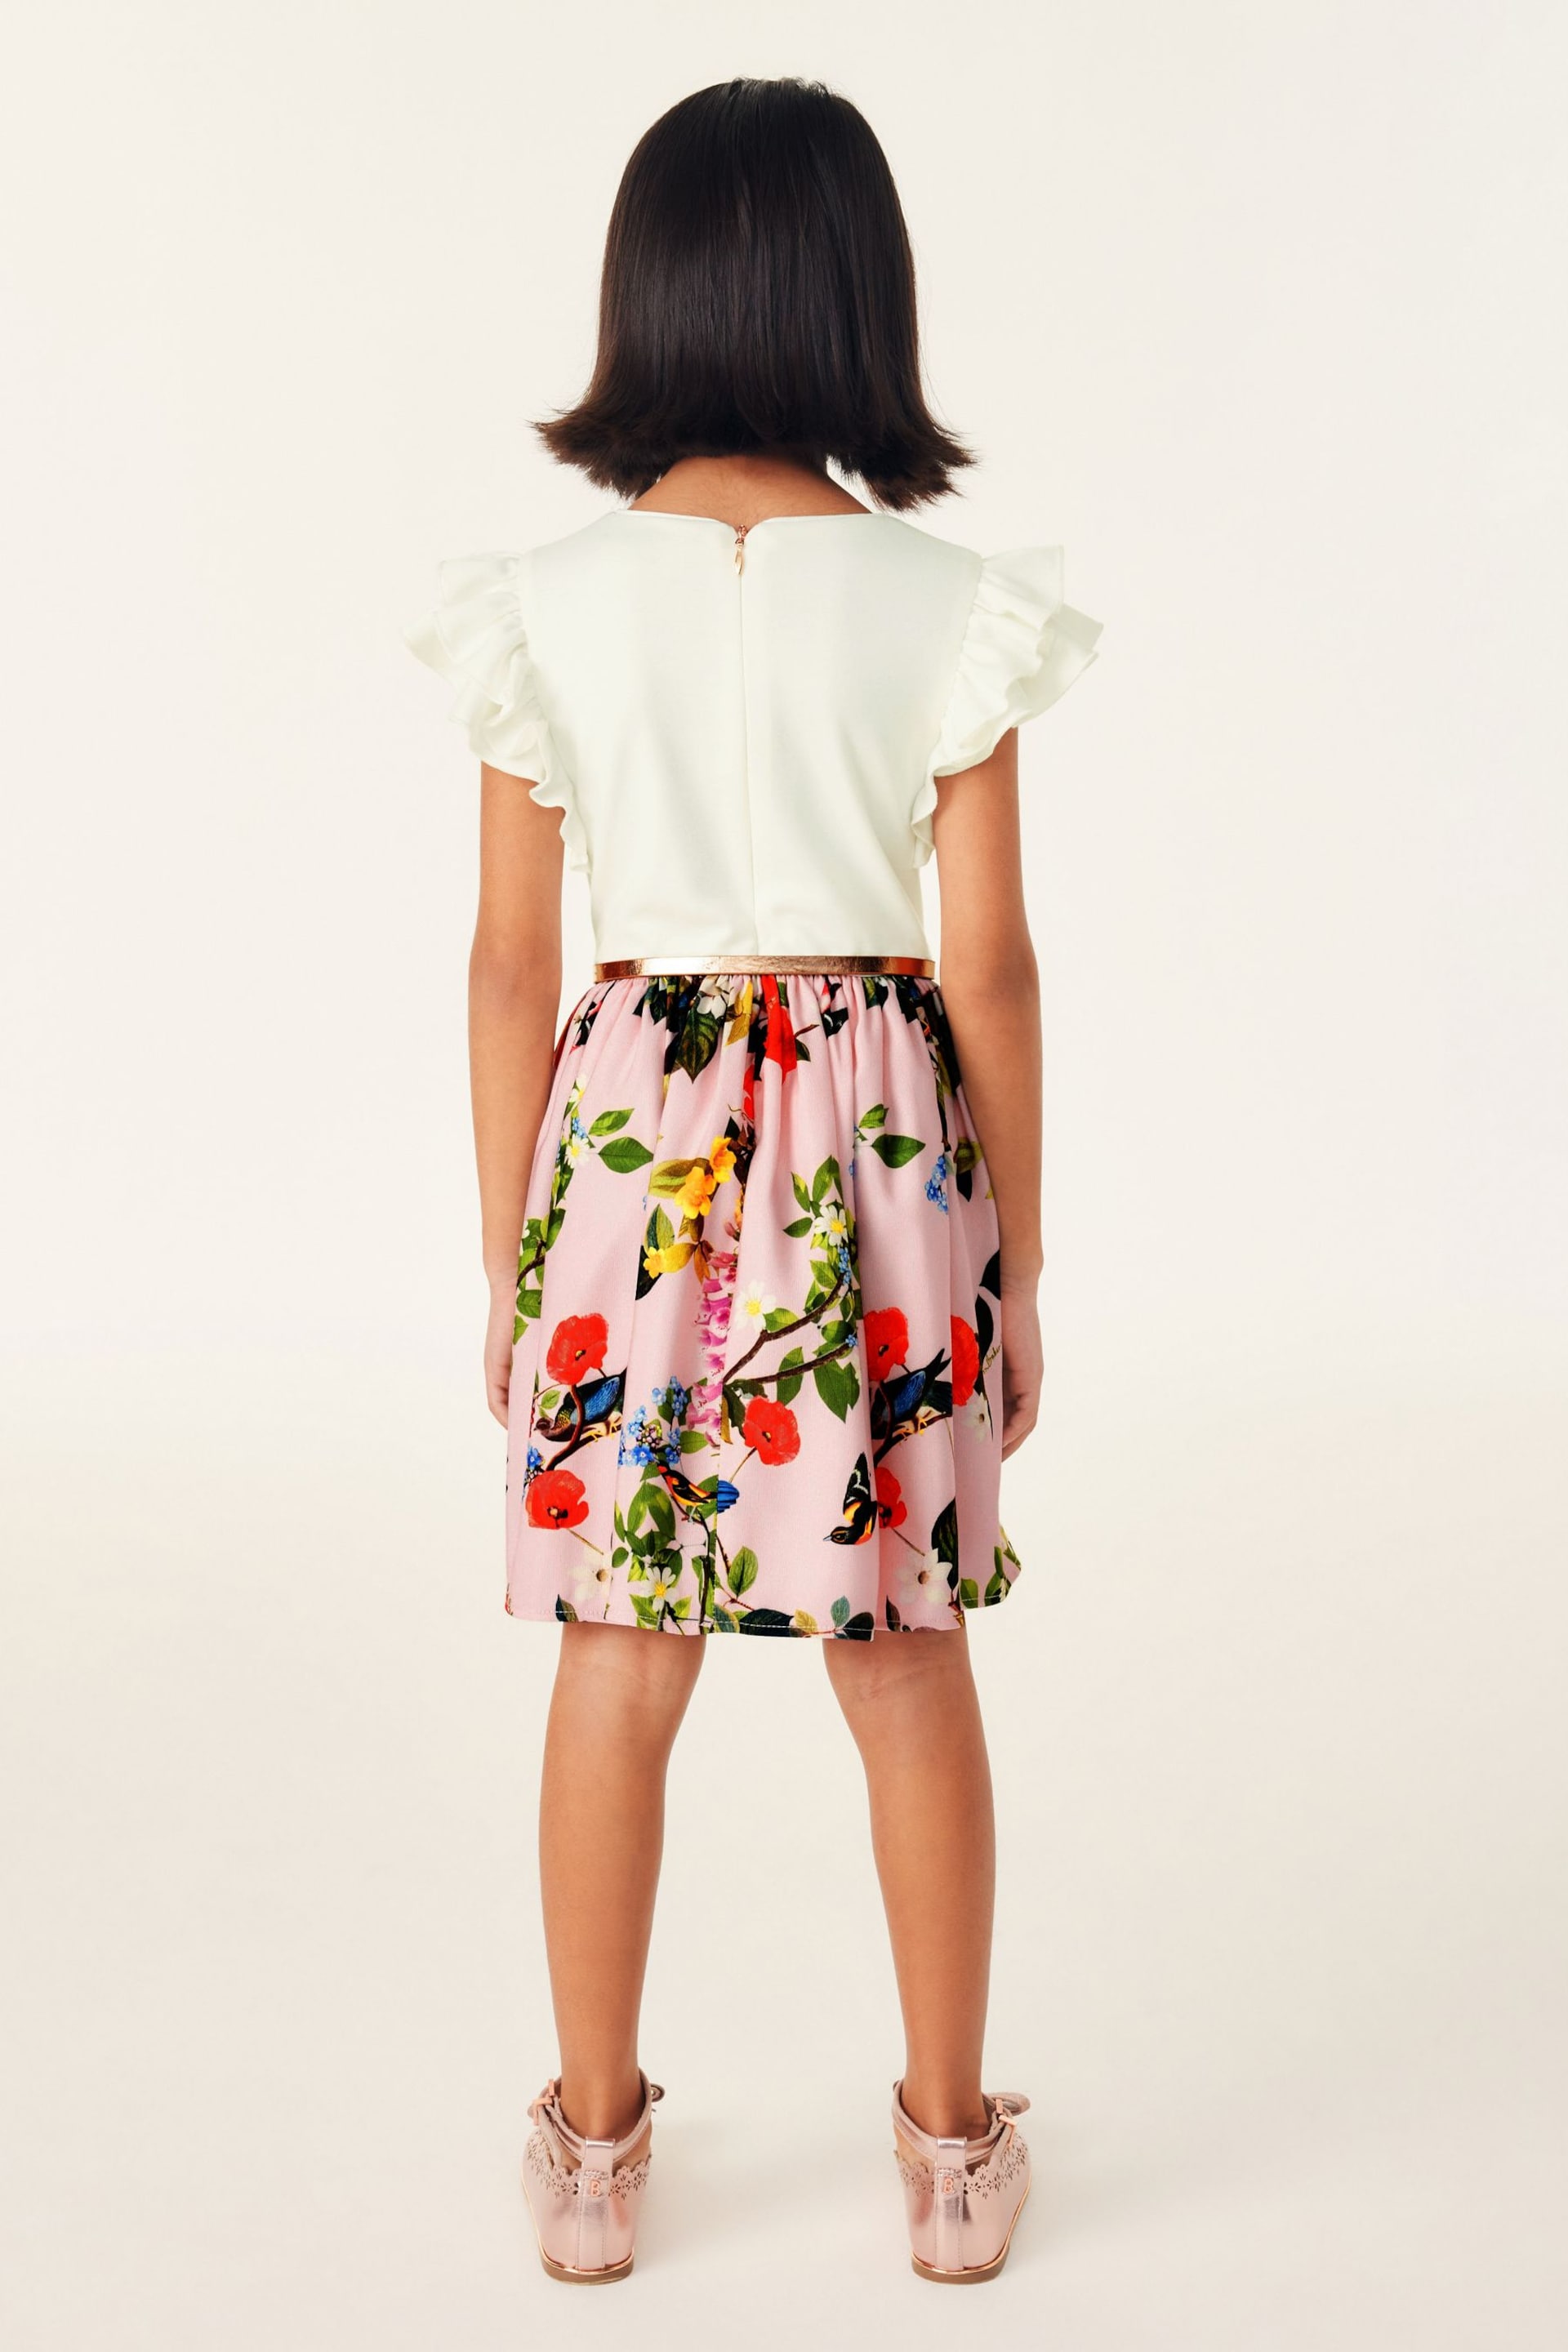 Baker by Ted Baker Floral 2-in-1 Dress - Image 3 of 14